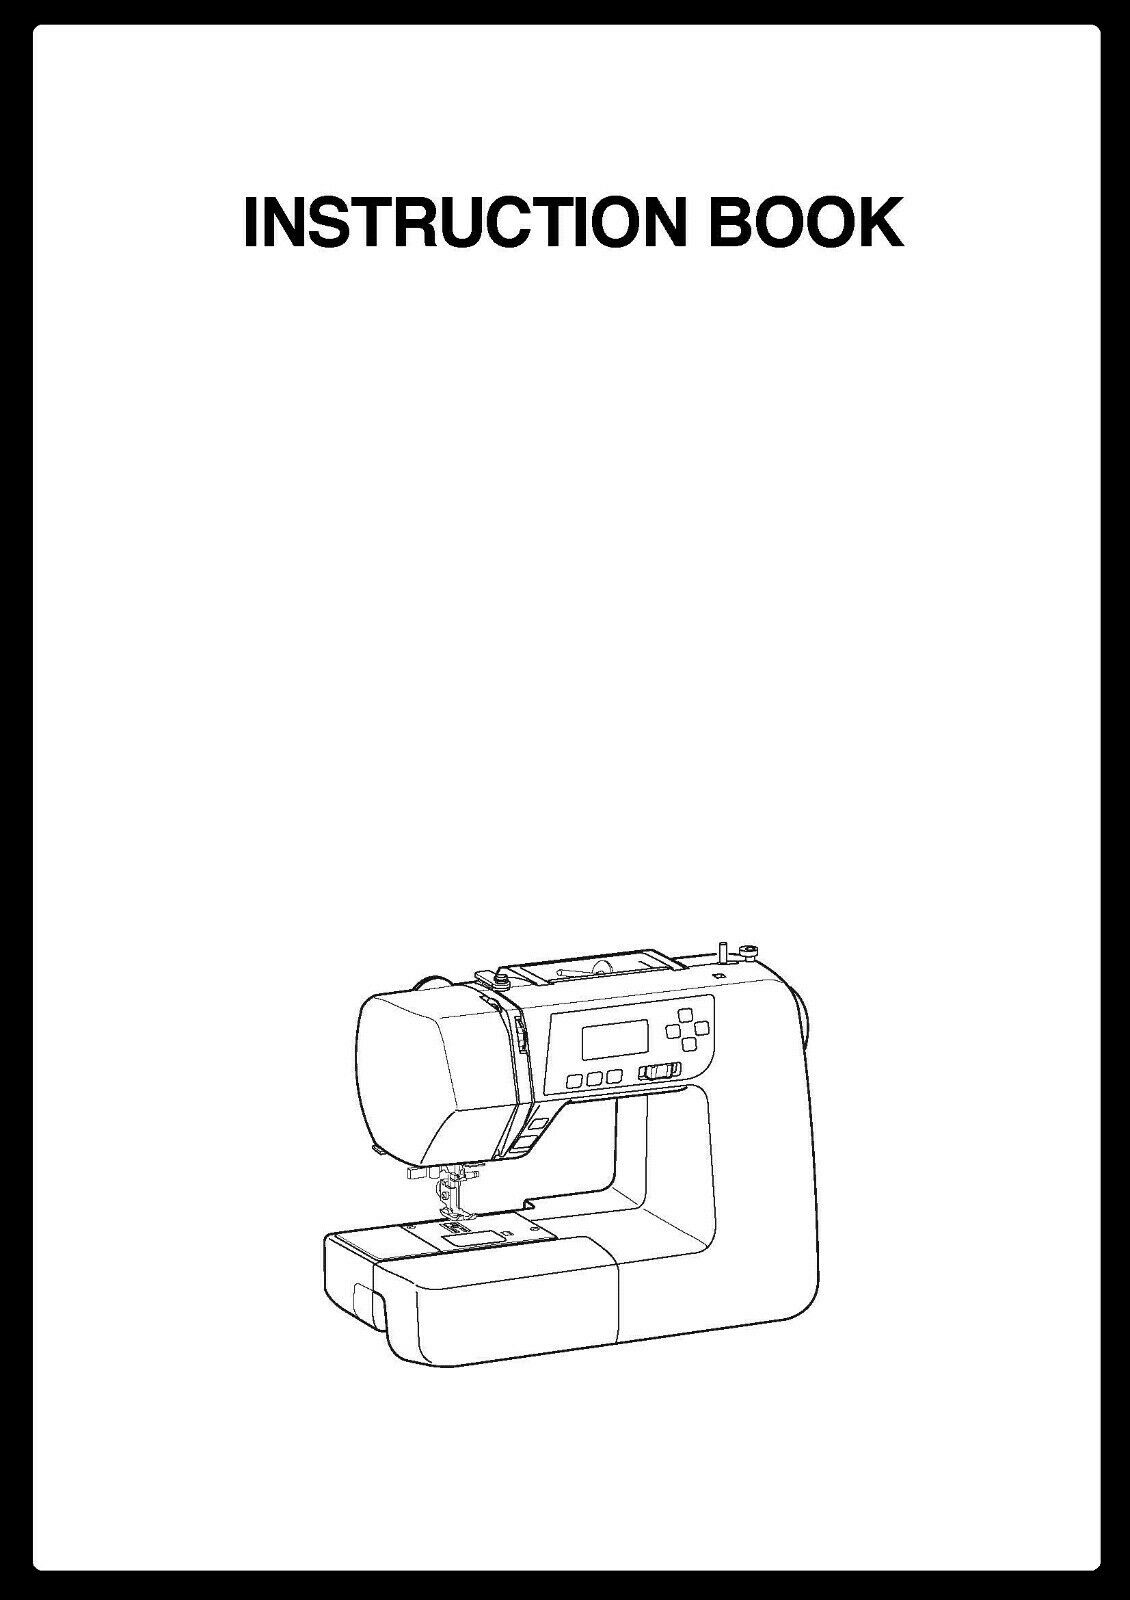 Janome 3160qdc Sewing Machine User Manual Instructions Spiral Bound Reprint